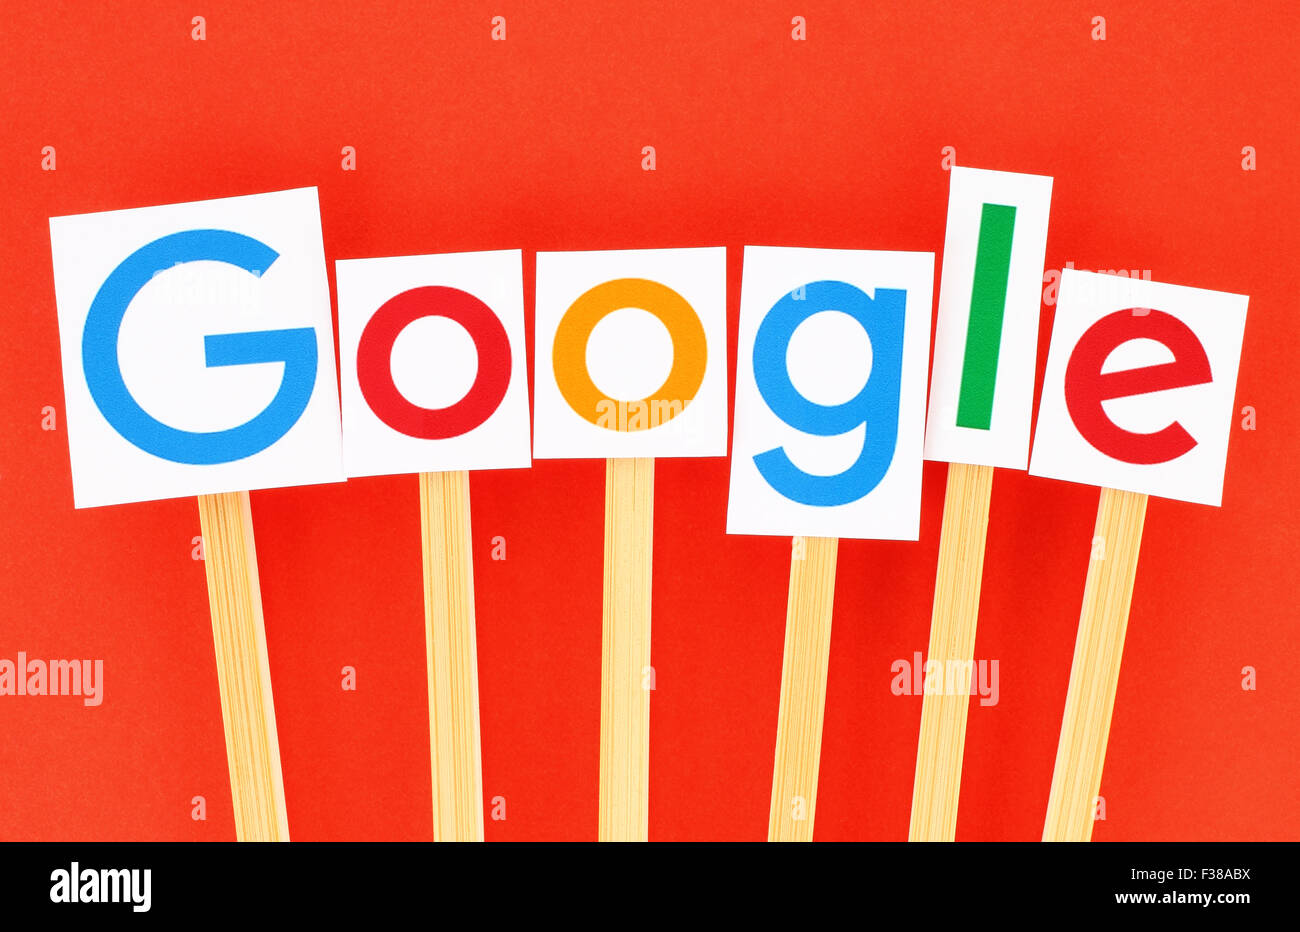 KIEV, UKRAINE - SEPTEMBER 02, 2015:New Google logotype printed on paper, cut and pasted on wooden sticks. Stock Photo